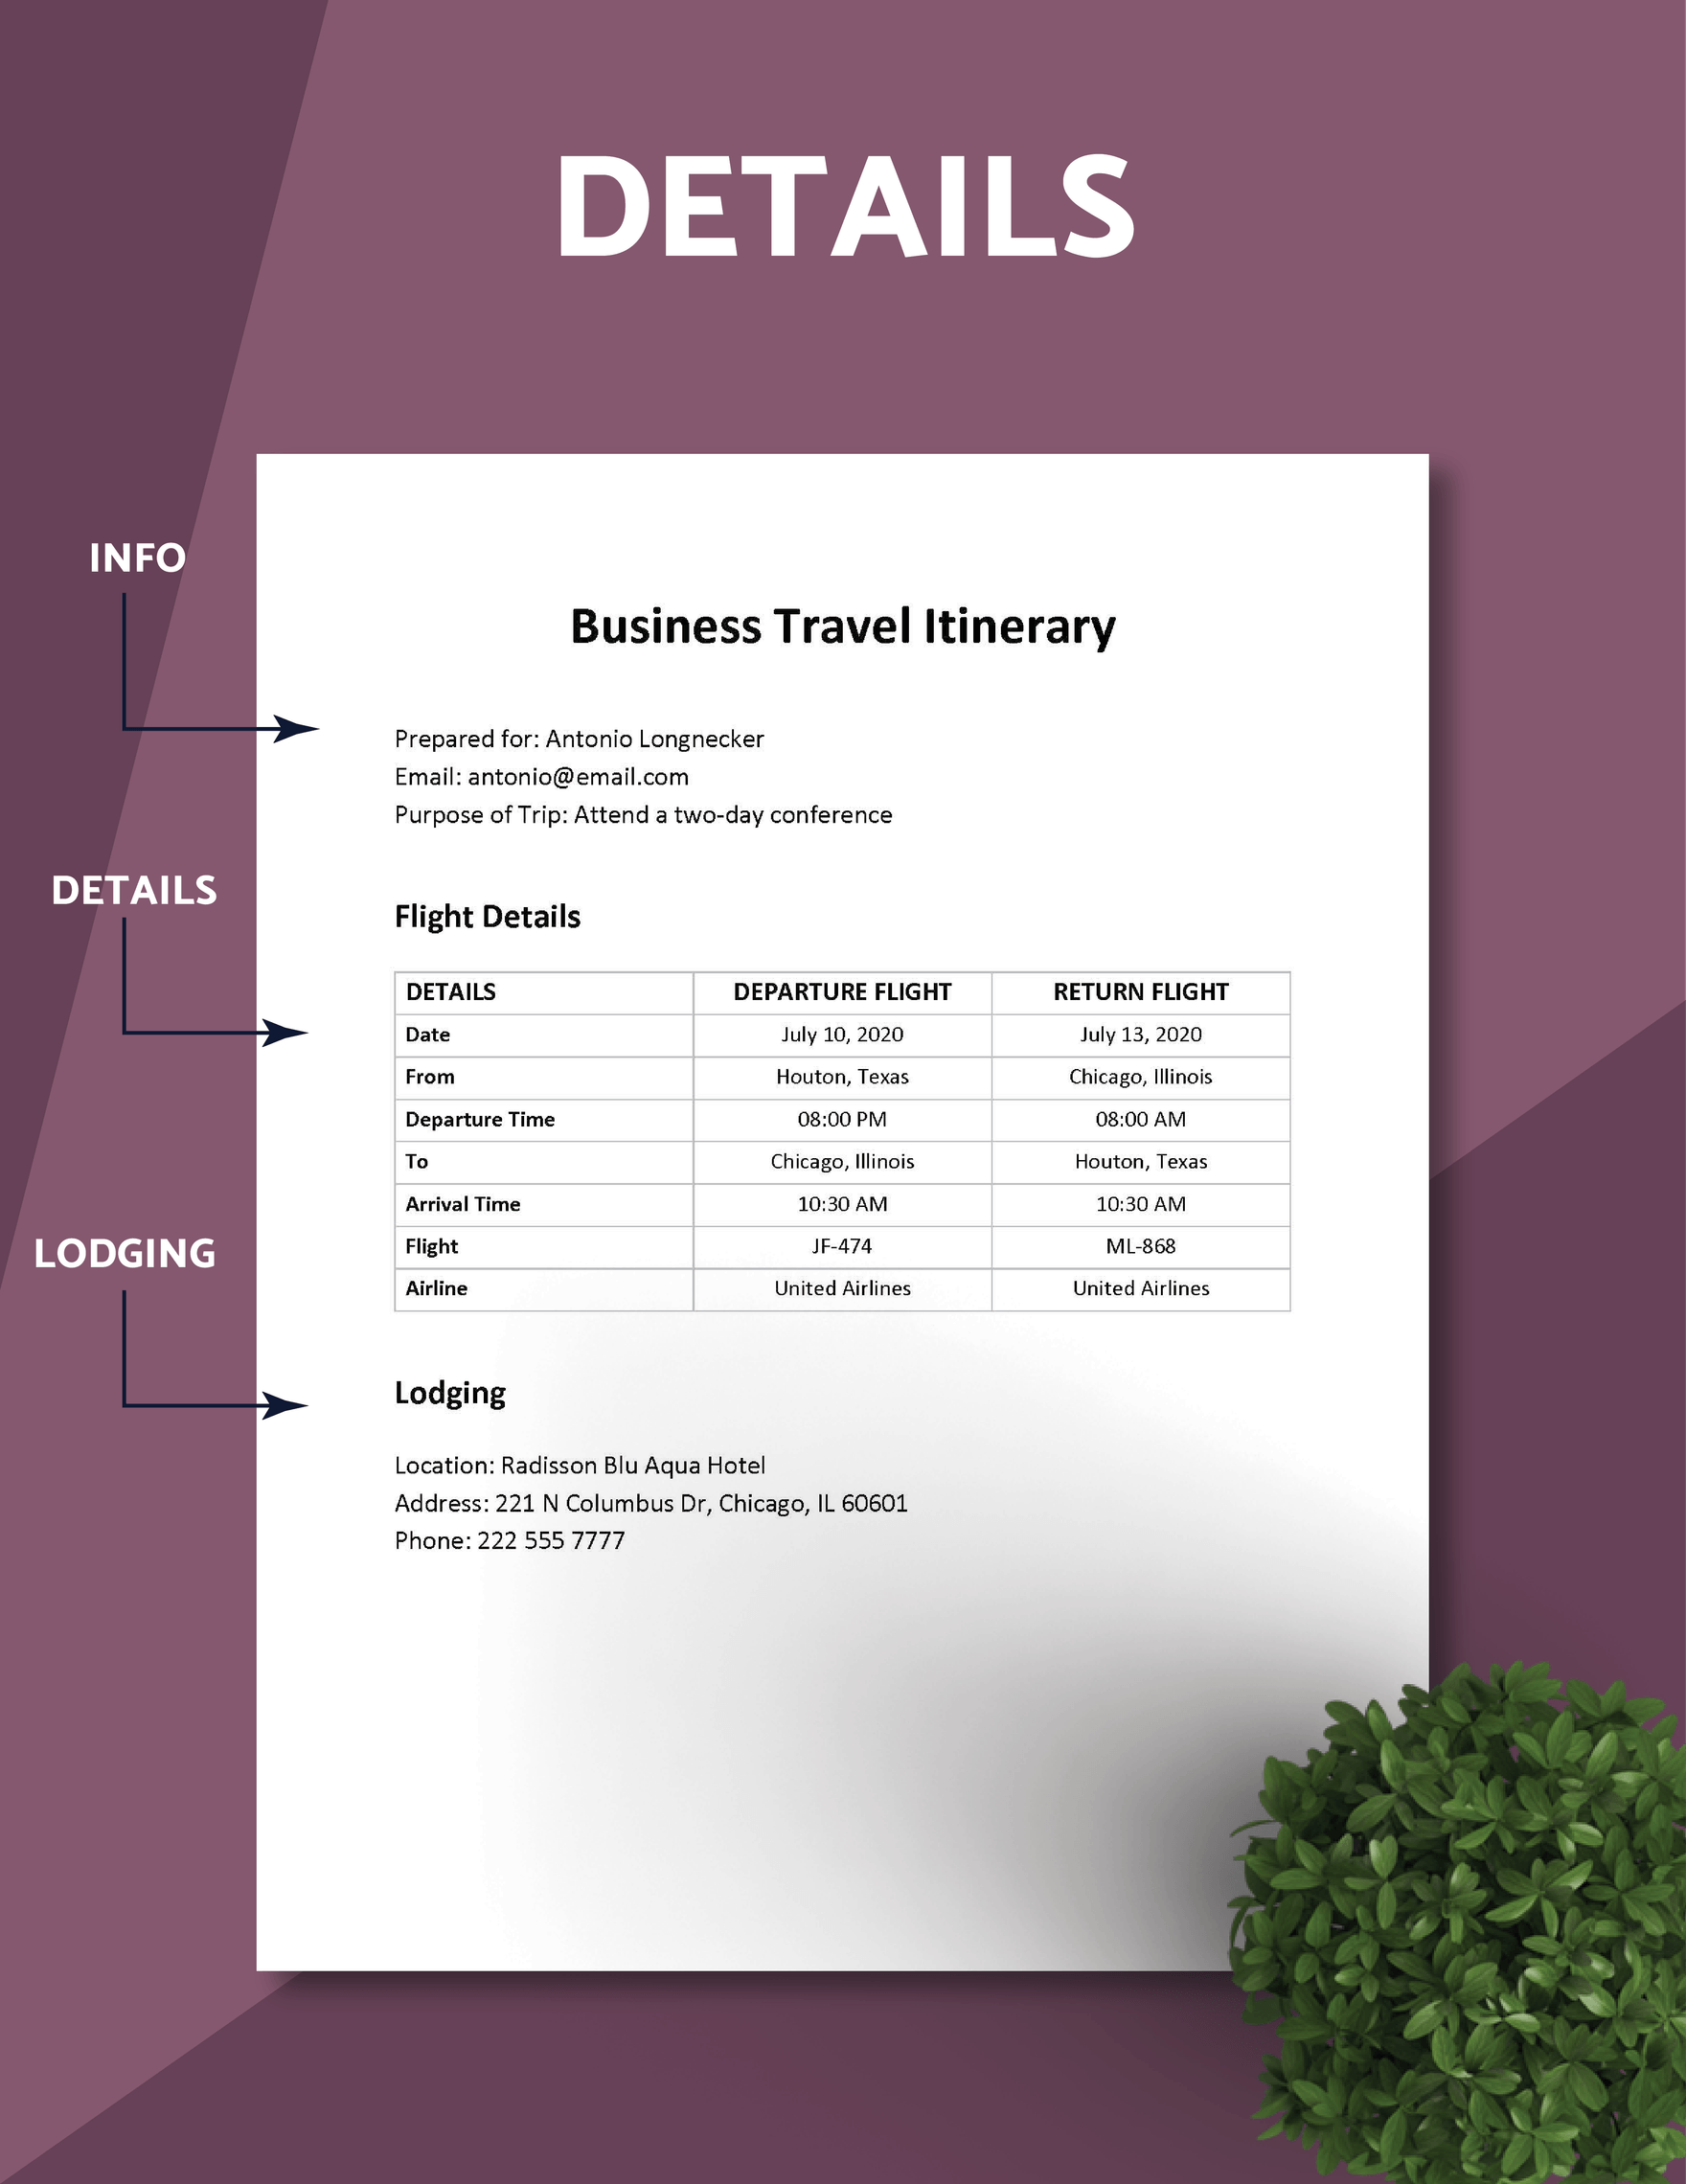 Business Travel Itinerary Format Template